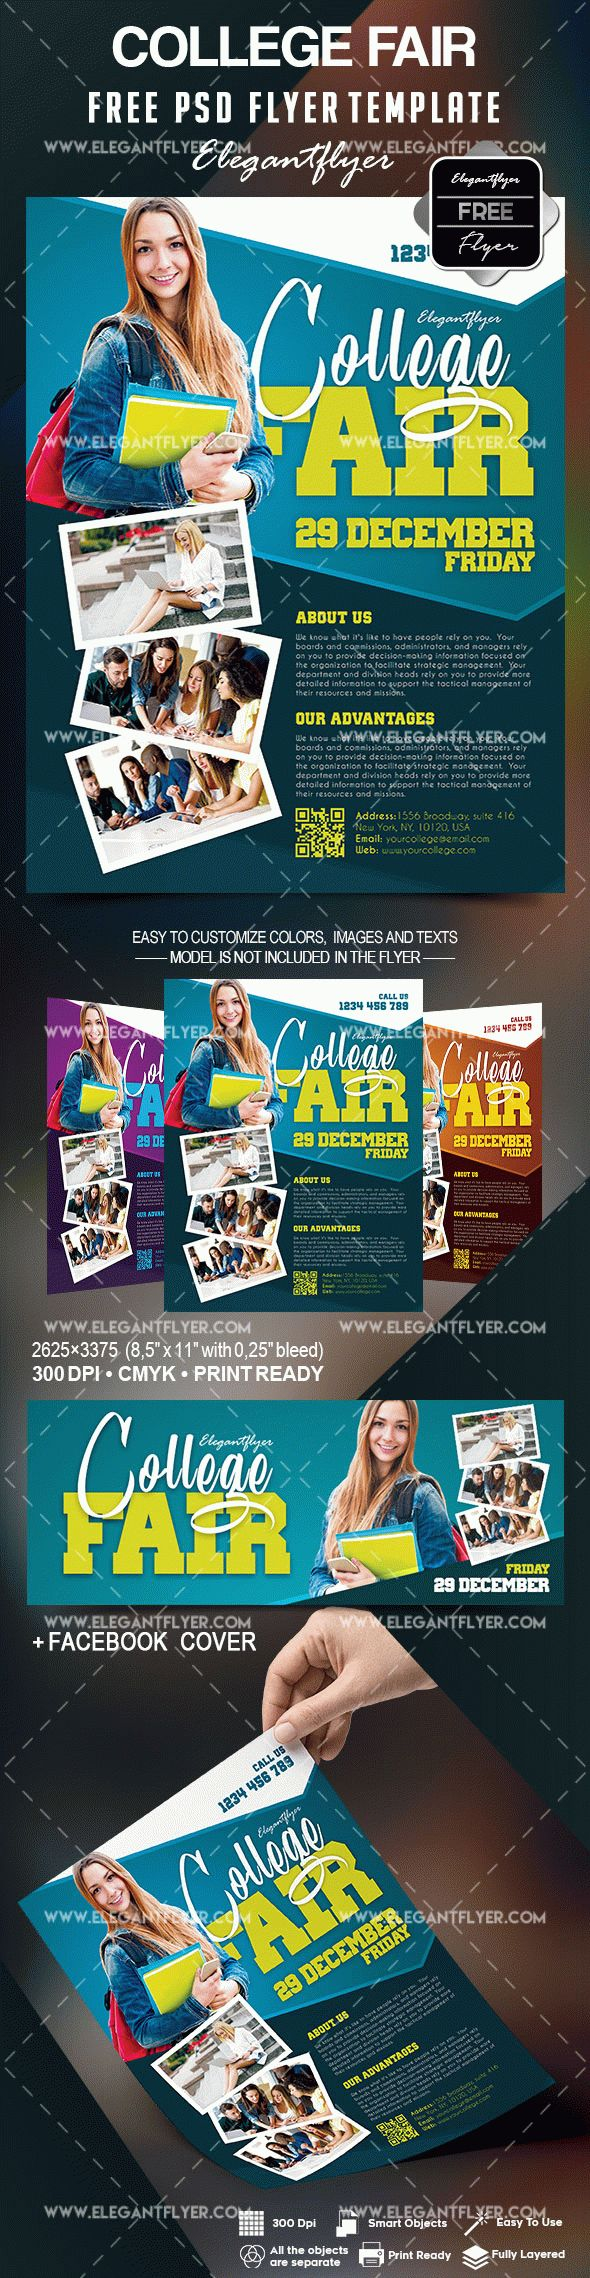 Free College Fair Flyer Template  by ElegantFlyer Intended For College Fair Flyer Template For College Fair Flyer Template